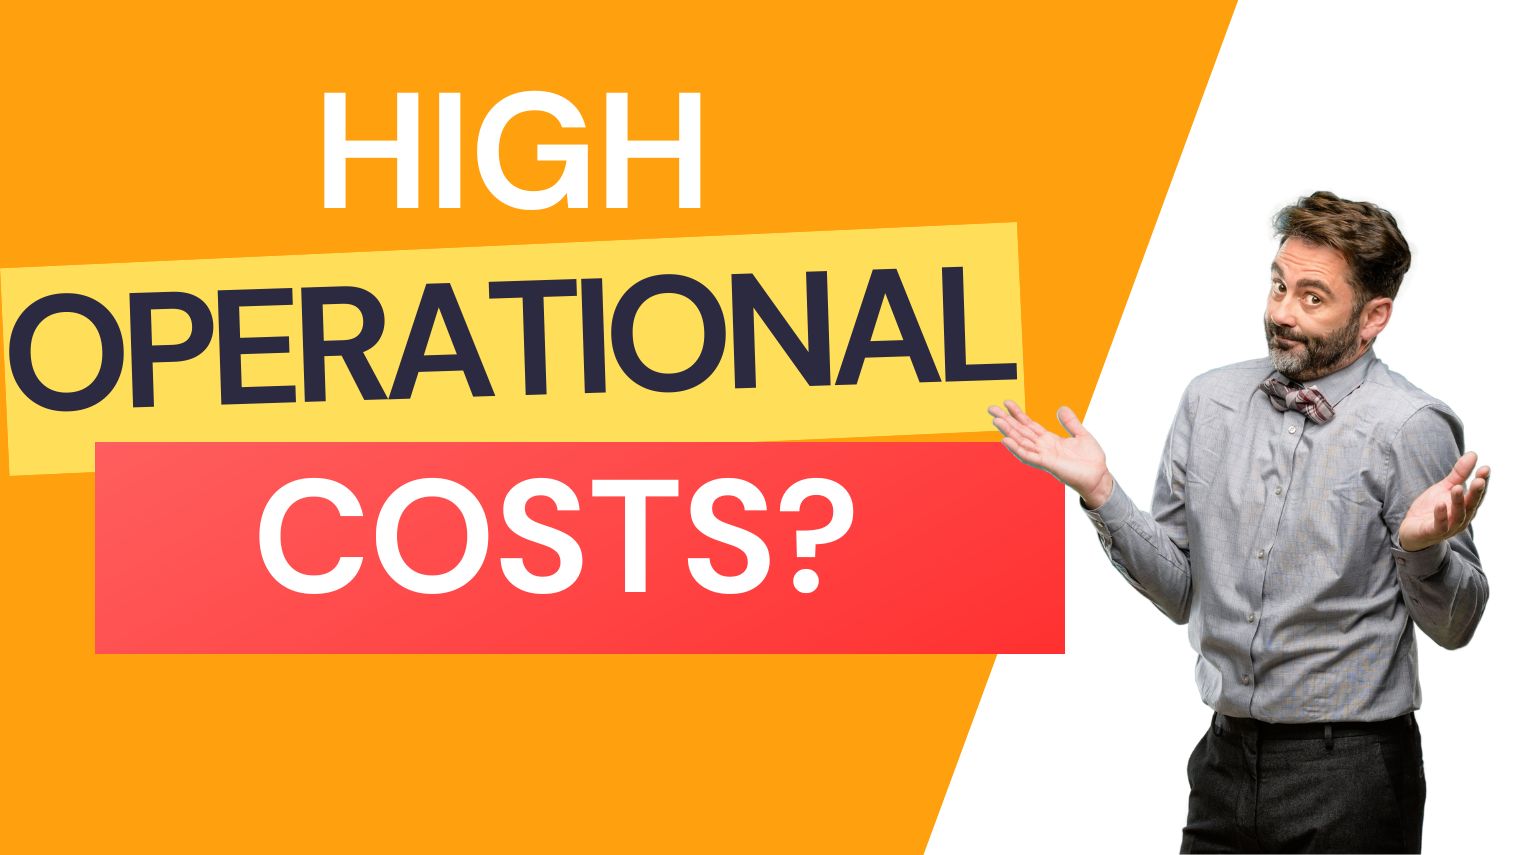 Is your customer service being disrupted because of high operational costs?